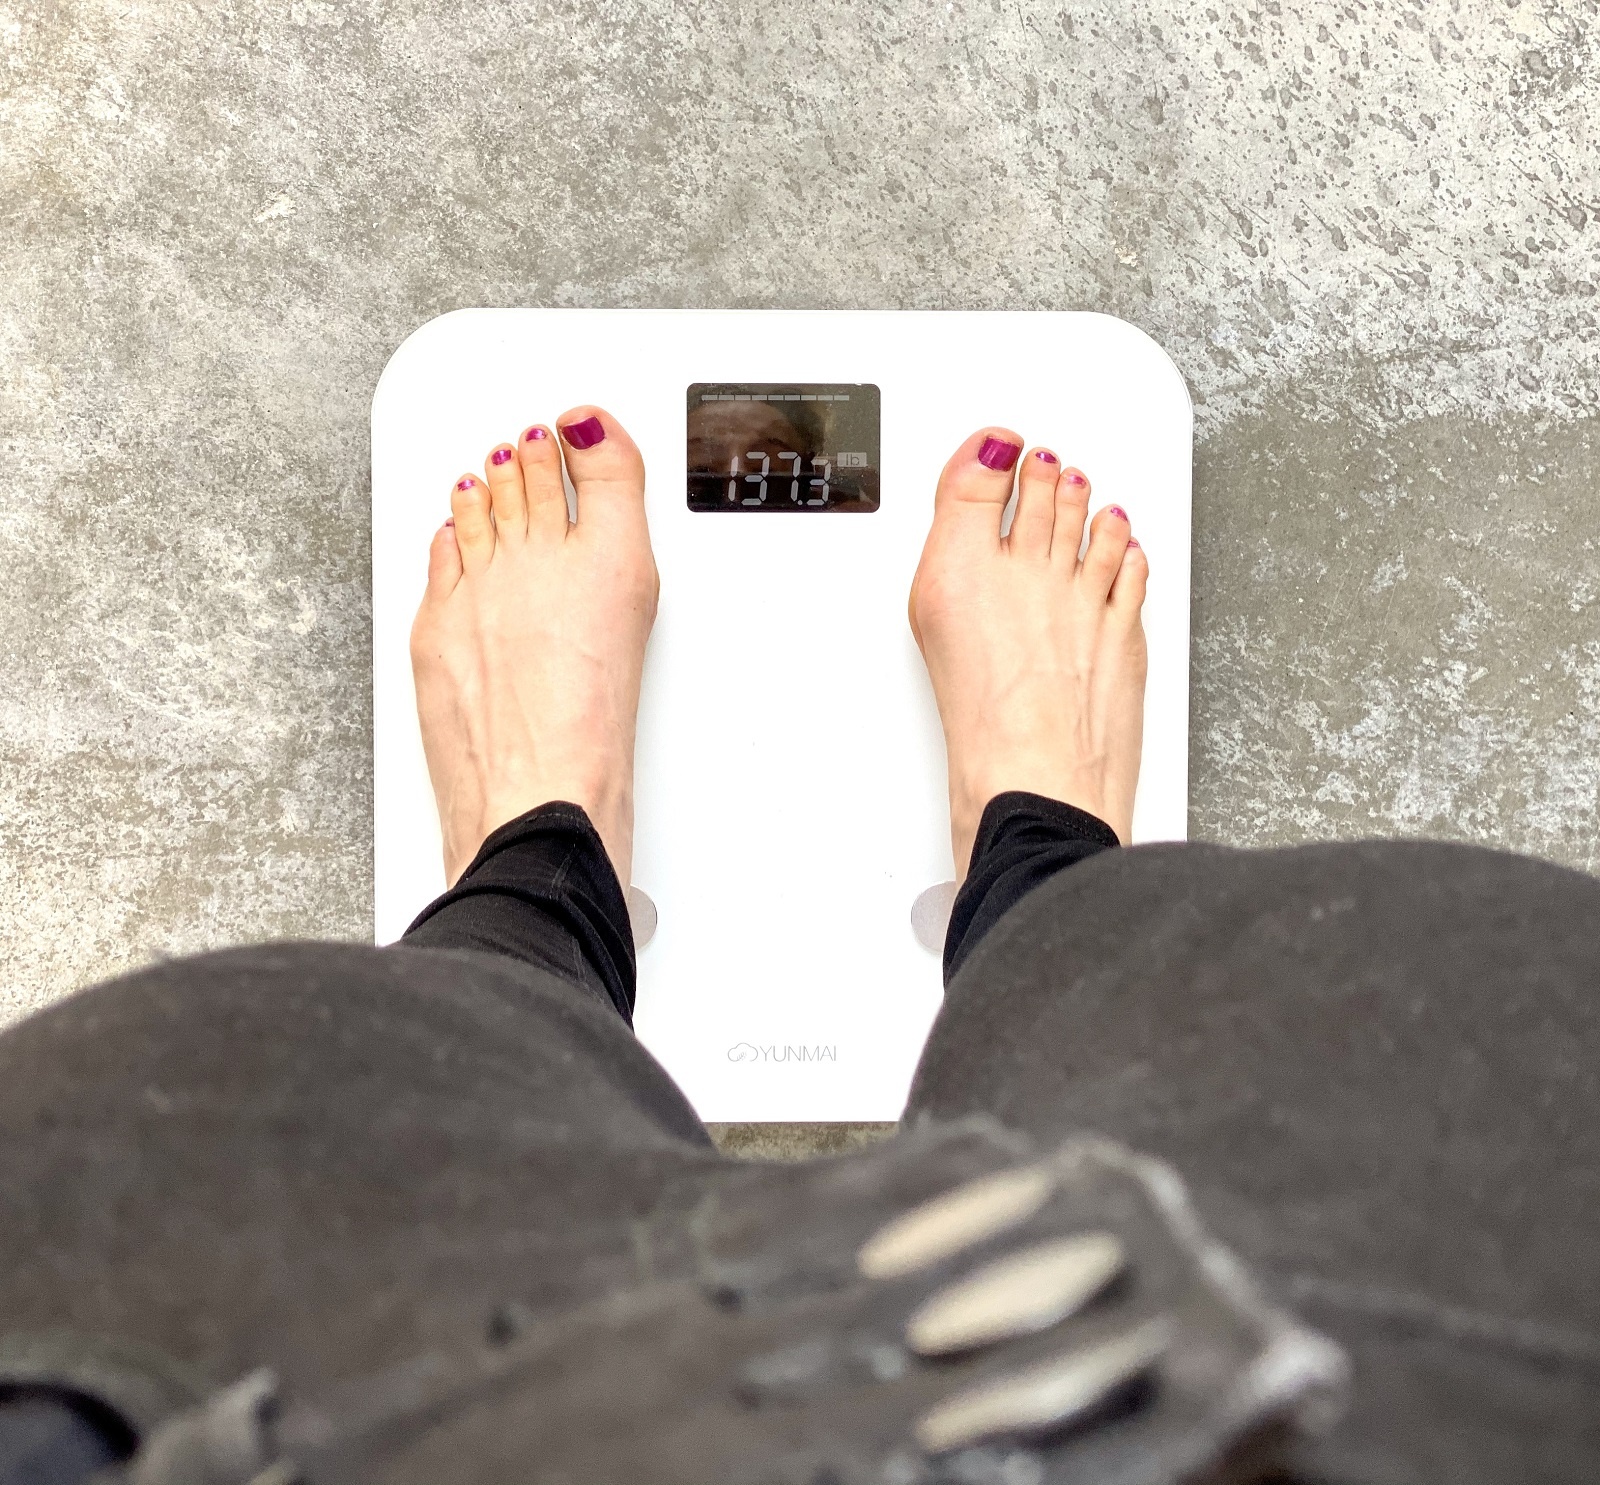 Scale showing how to not gain weight and maintain weight while working from home during coronavirus